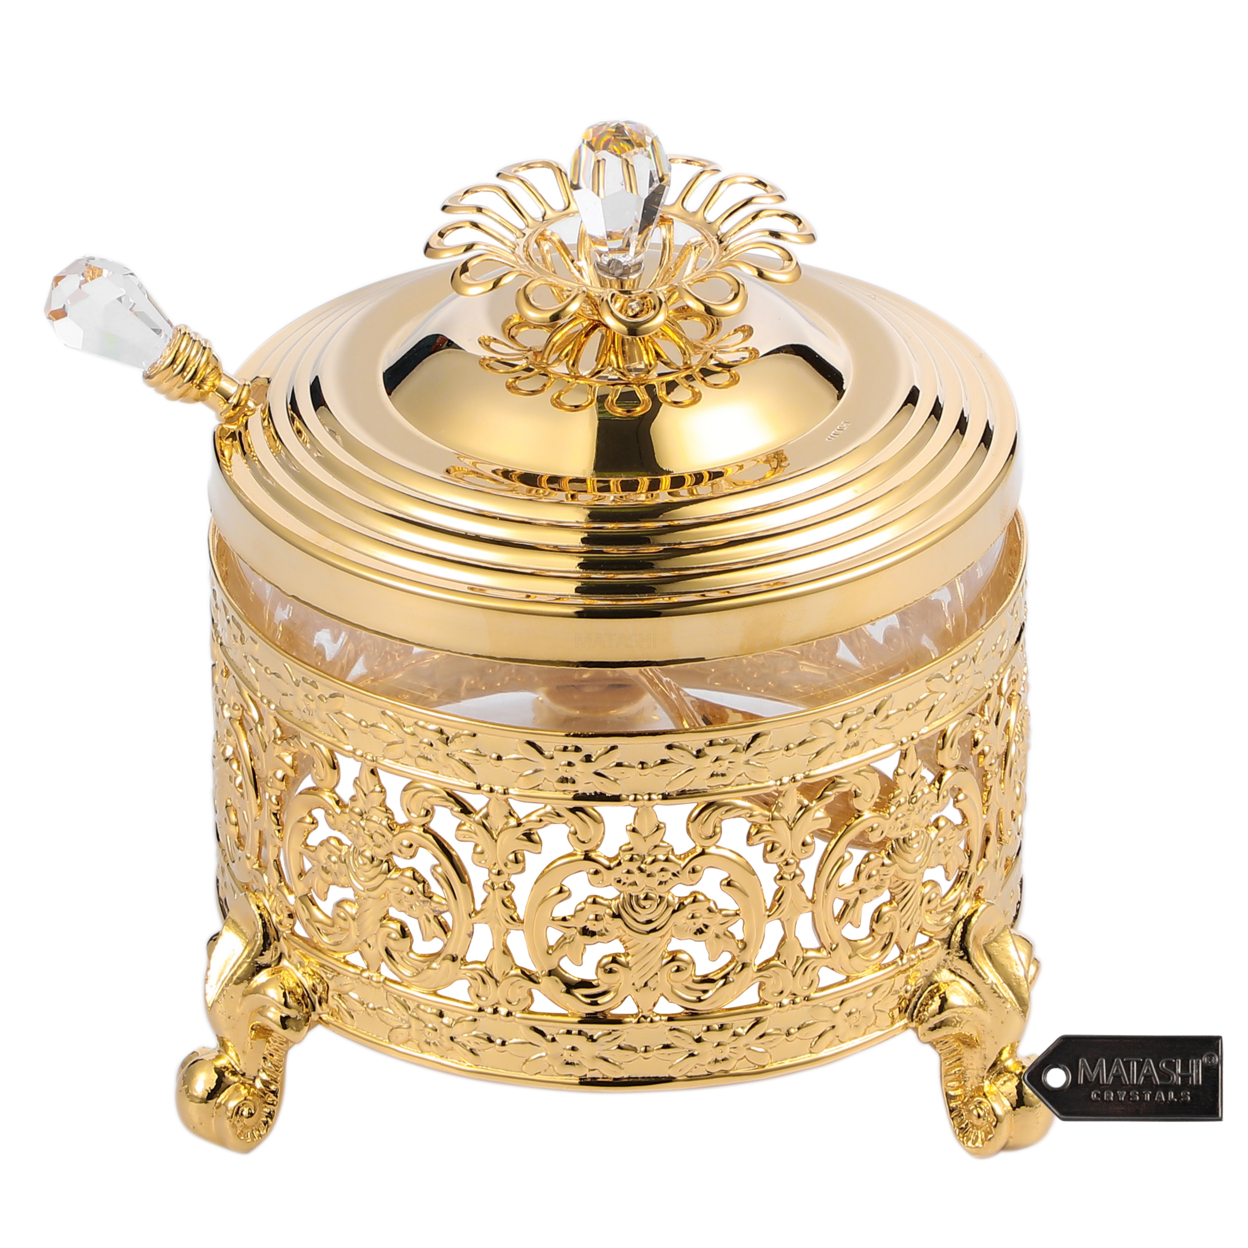 Matashi 24K Gold Plated Sugar Bowl, Honey Dish, Glass Bowl - Detailed Intricate Design And Flower On Cover With Crystal Studded Spoon